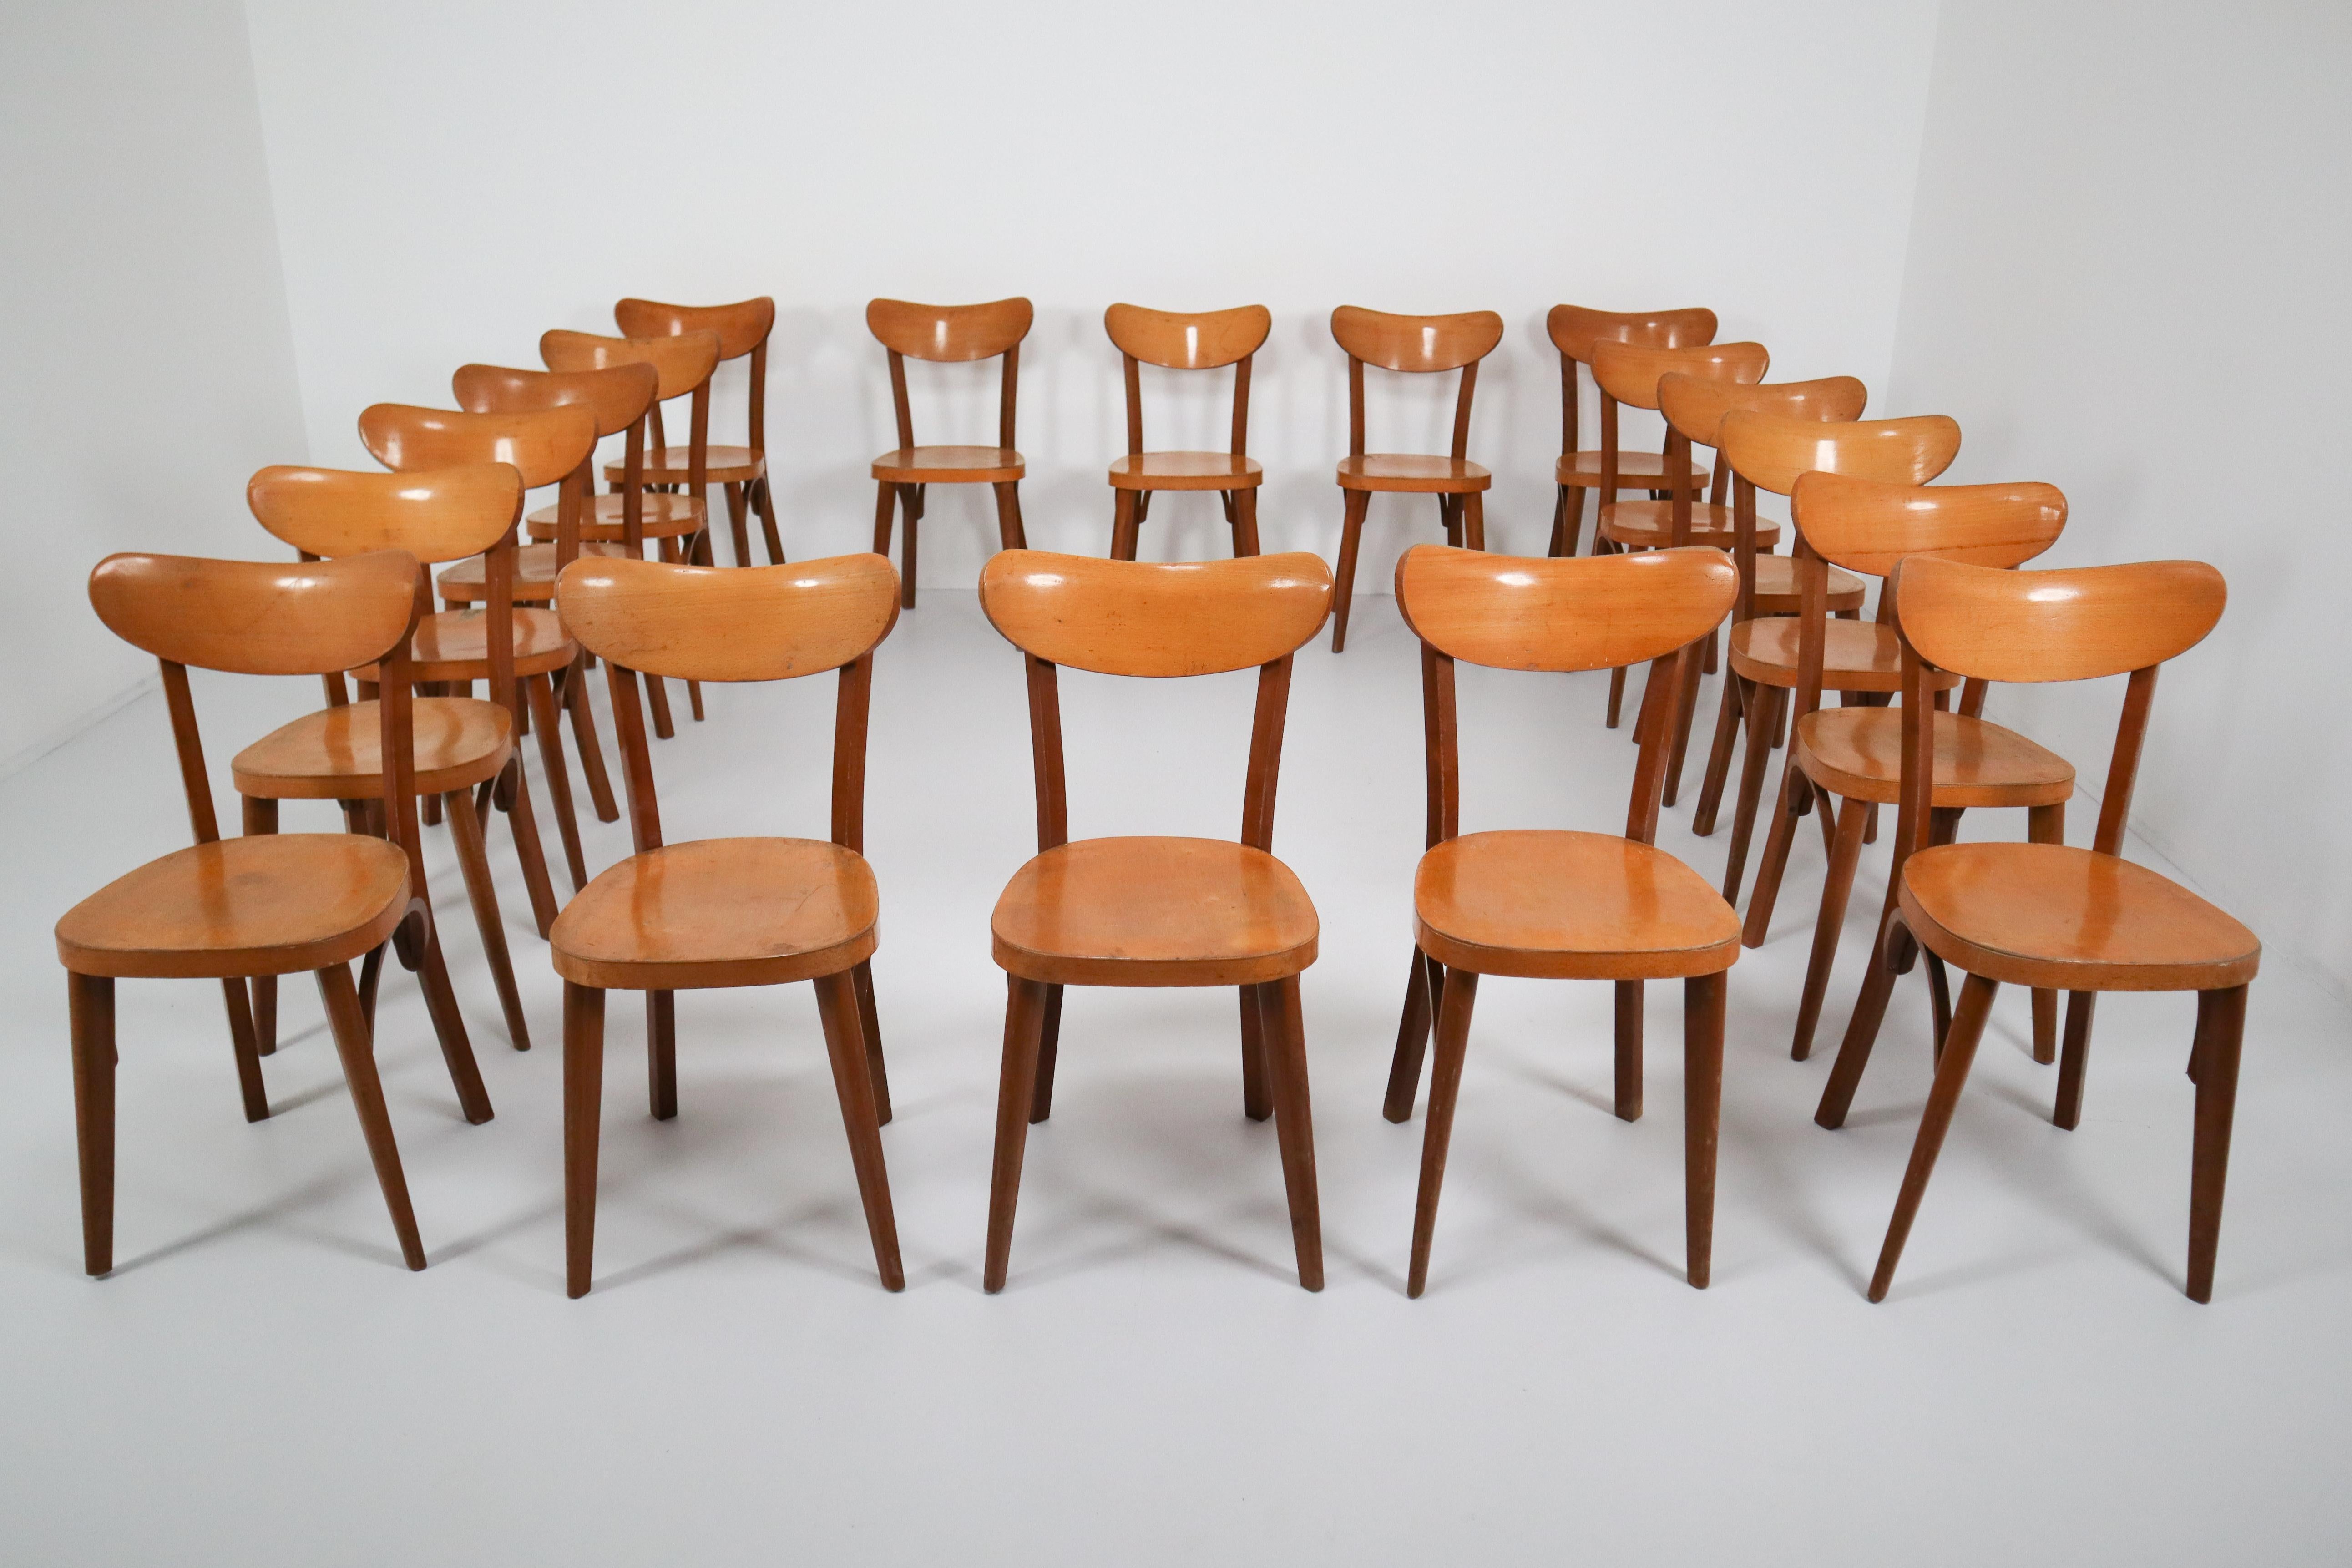 Beech Midcentury French Set of 20 Bistro or Cafe Wooden Chairs, 1950s